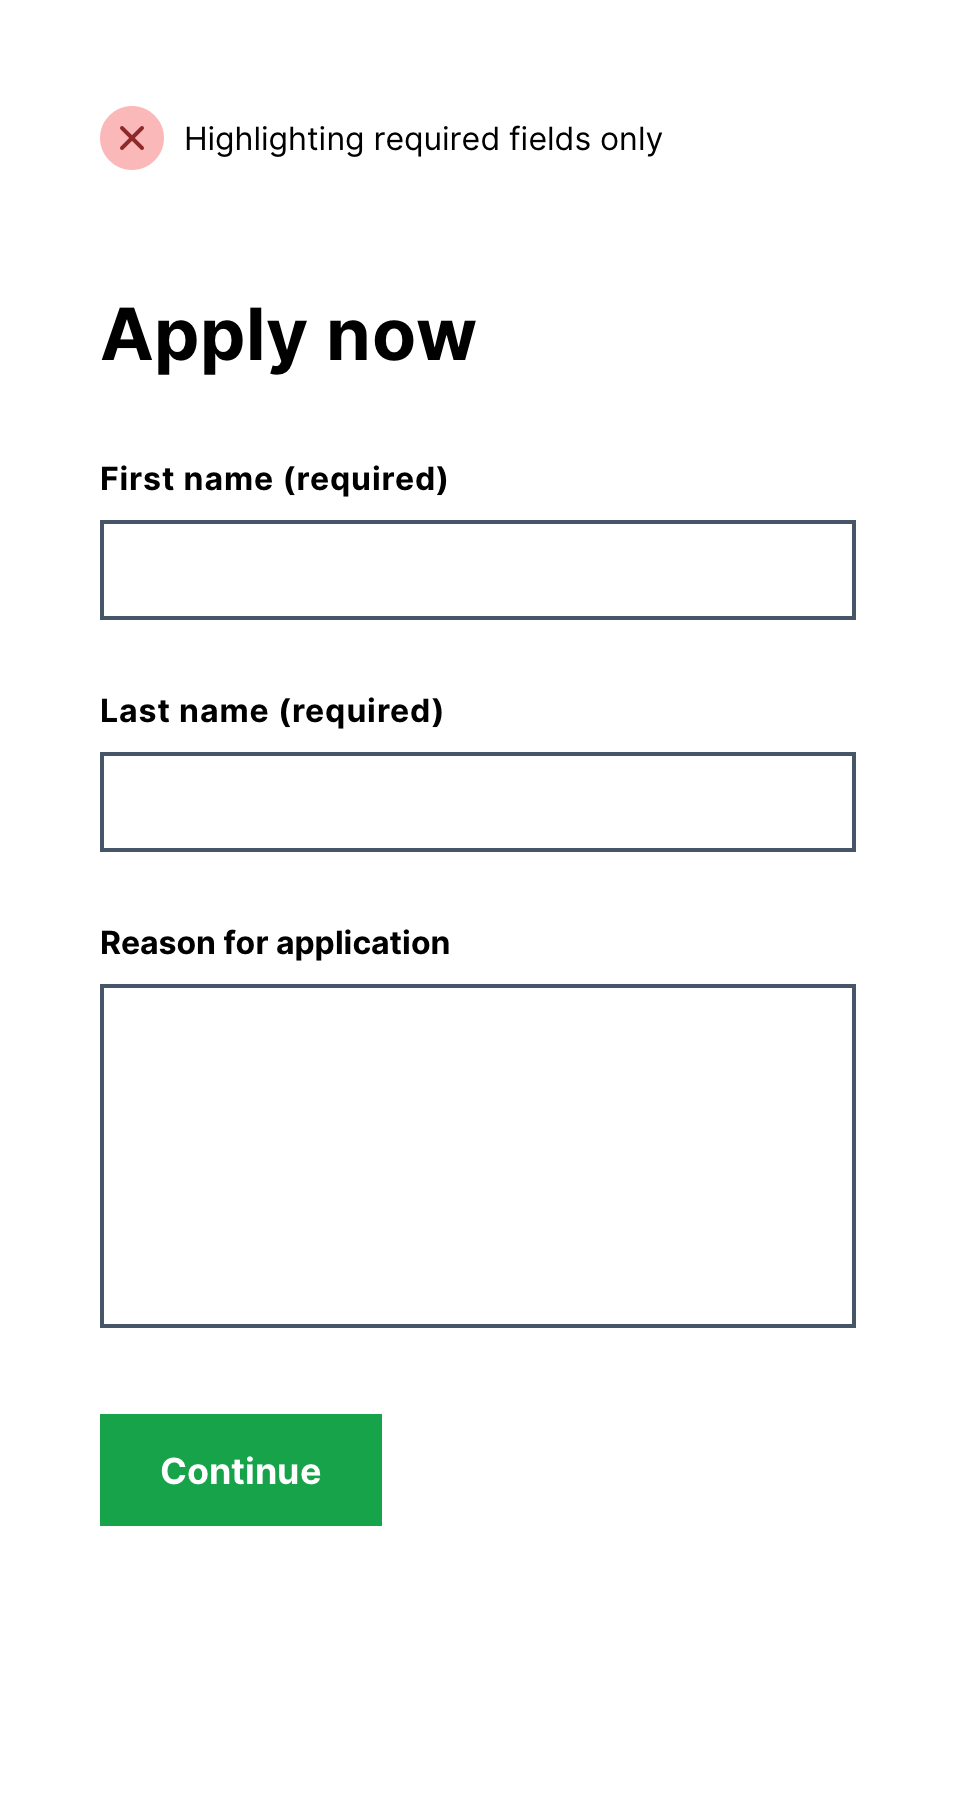 A form highlighting required fields only